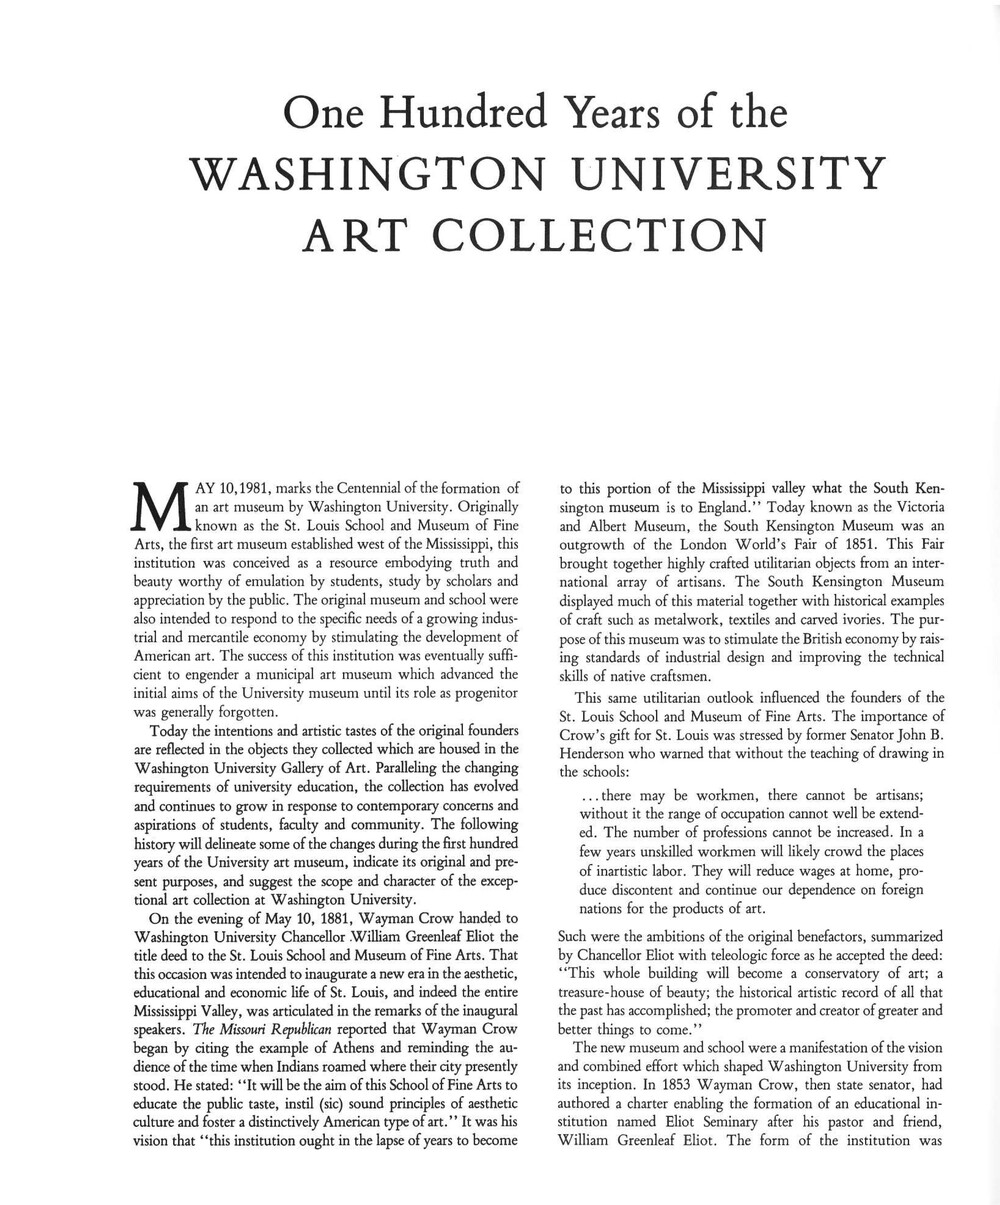 The first page of "One Hundred Years of the Washington University Art Collection"